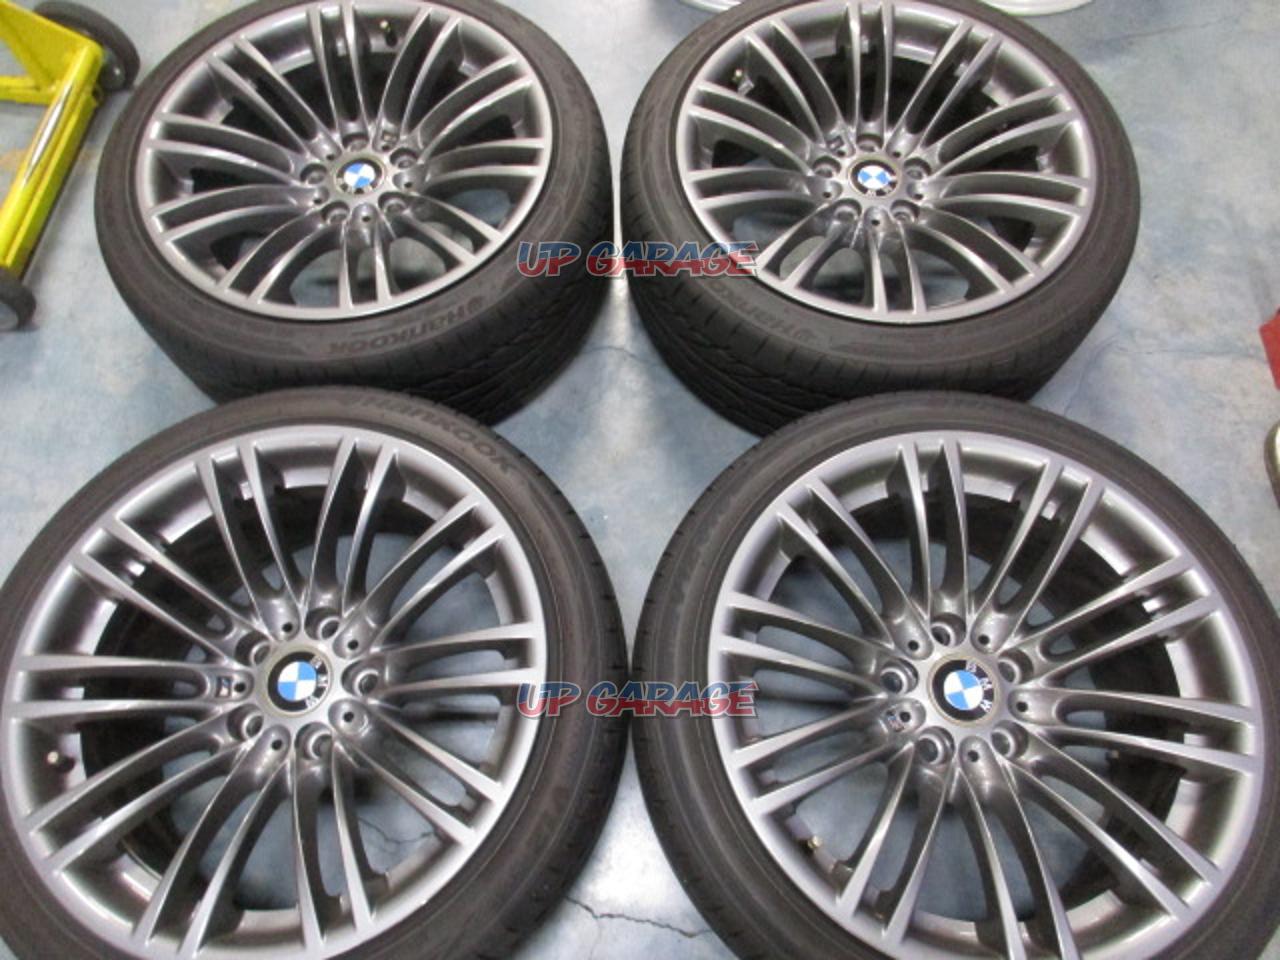 Featured image of post Bmw 260M Wheels R c models car 1 10 on road body m3 bmw pc shell wheelbase 260mm for tt01 tt02